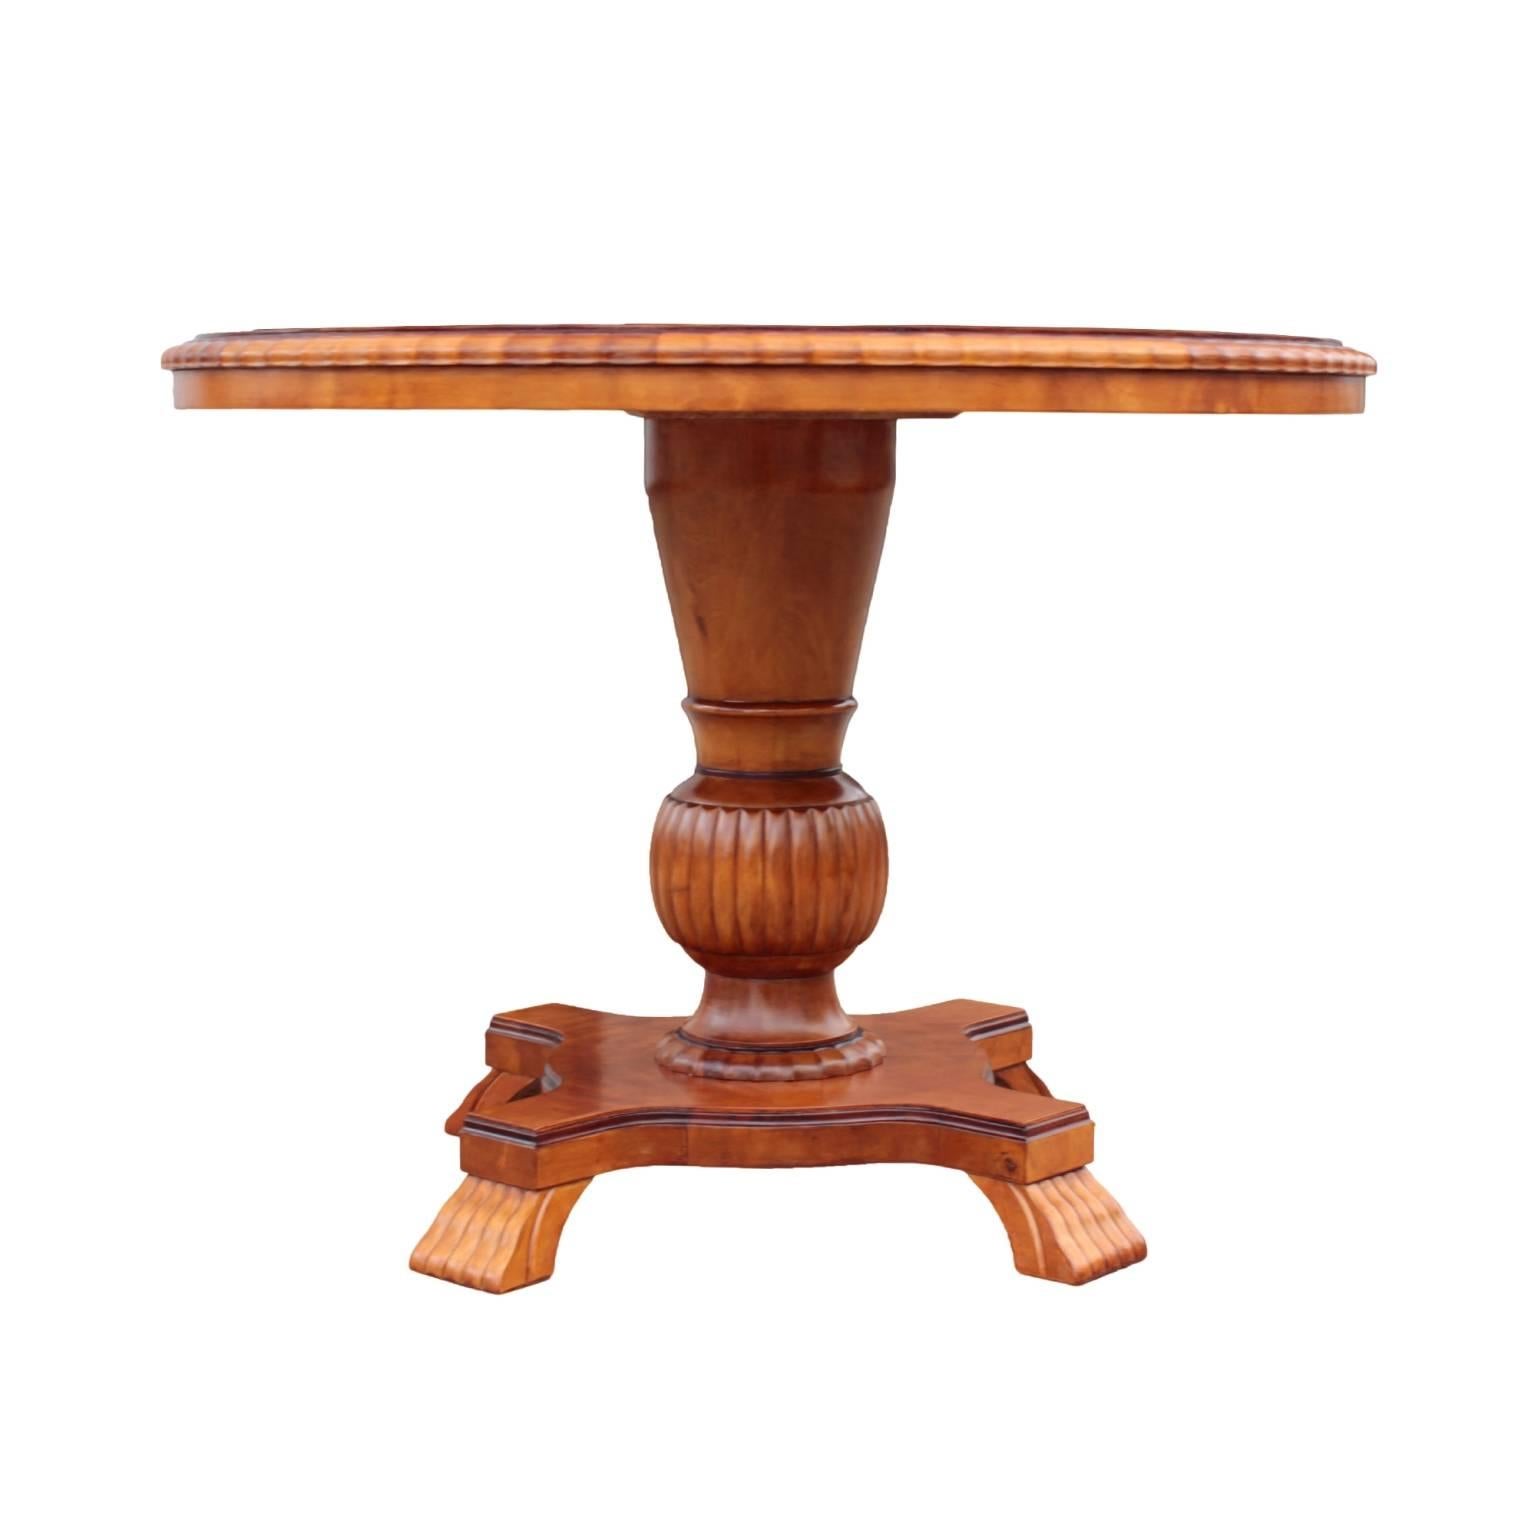 Round stepped table top with scalloped edge in bookmatched flame birch raised on reeded urn pedestal with scalloped plinth, the whole resting on a quadripartite base with stylized paw feet. In flame birch with dark accents.